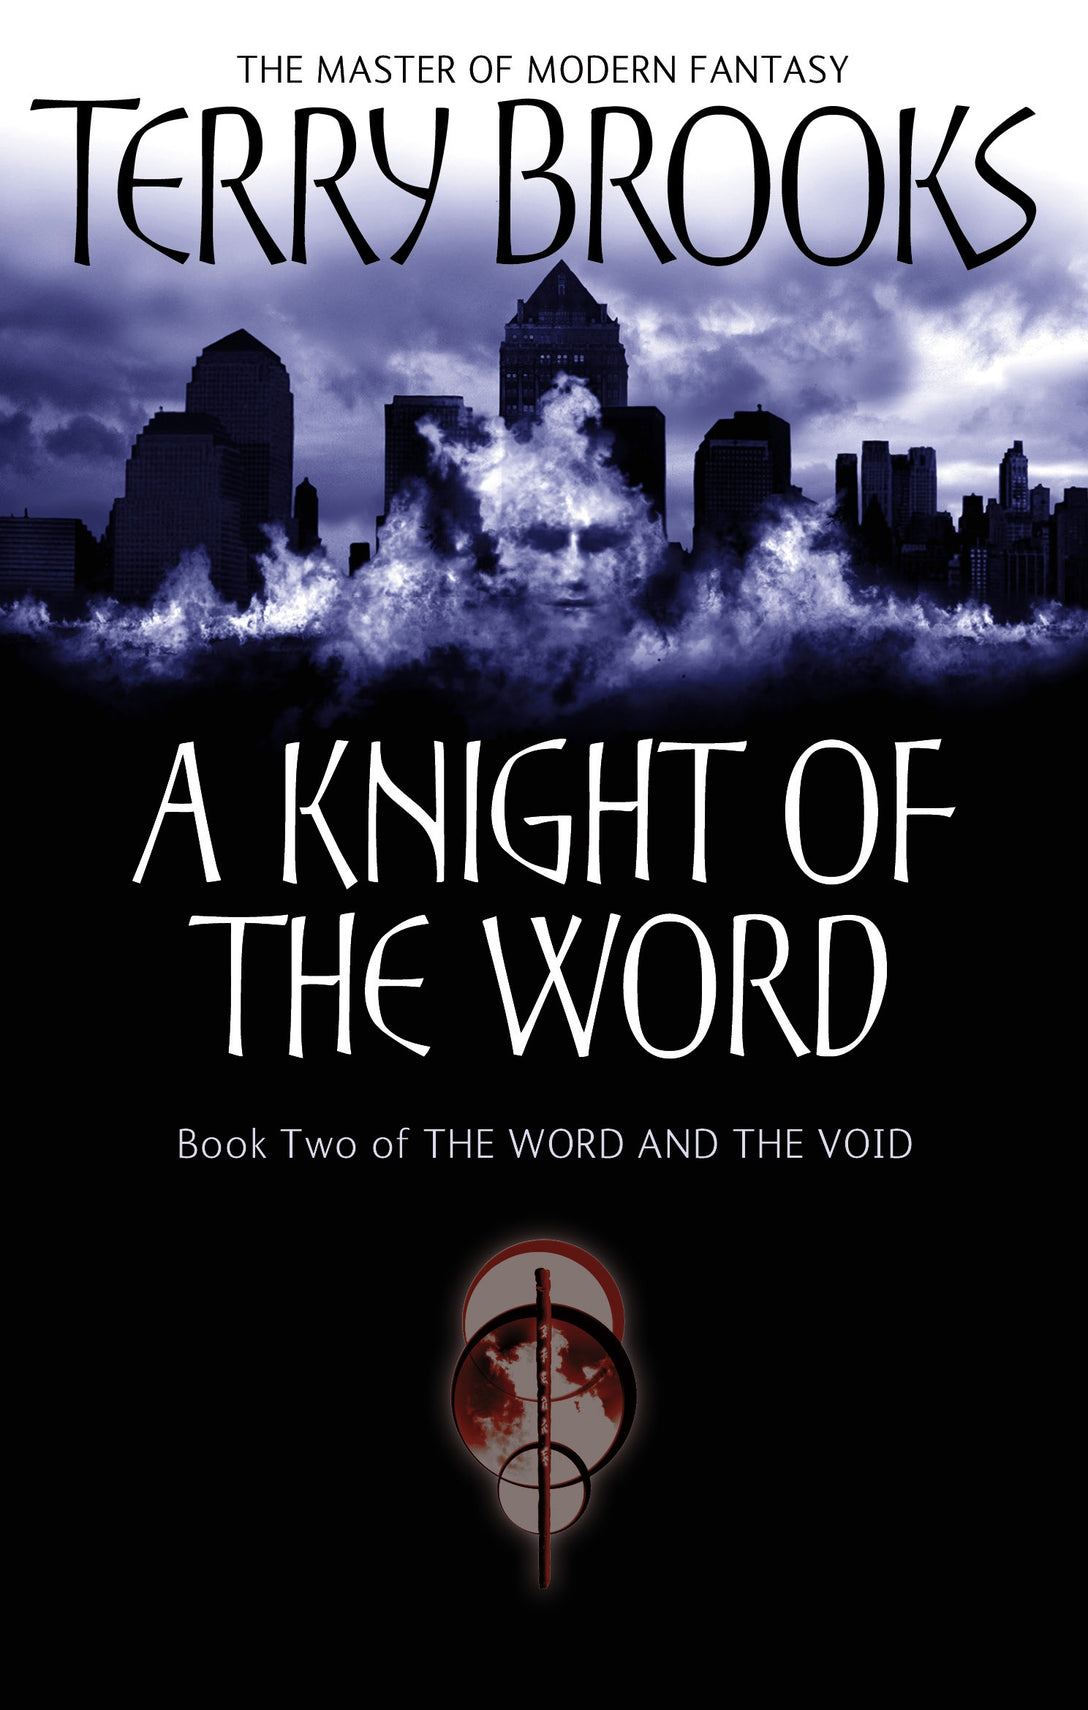 A Knight Of The Word by Terry Brooks